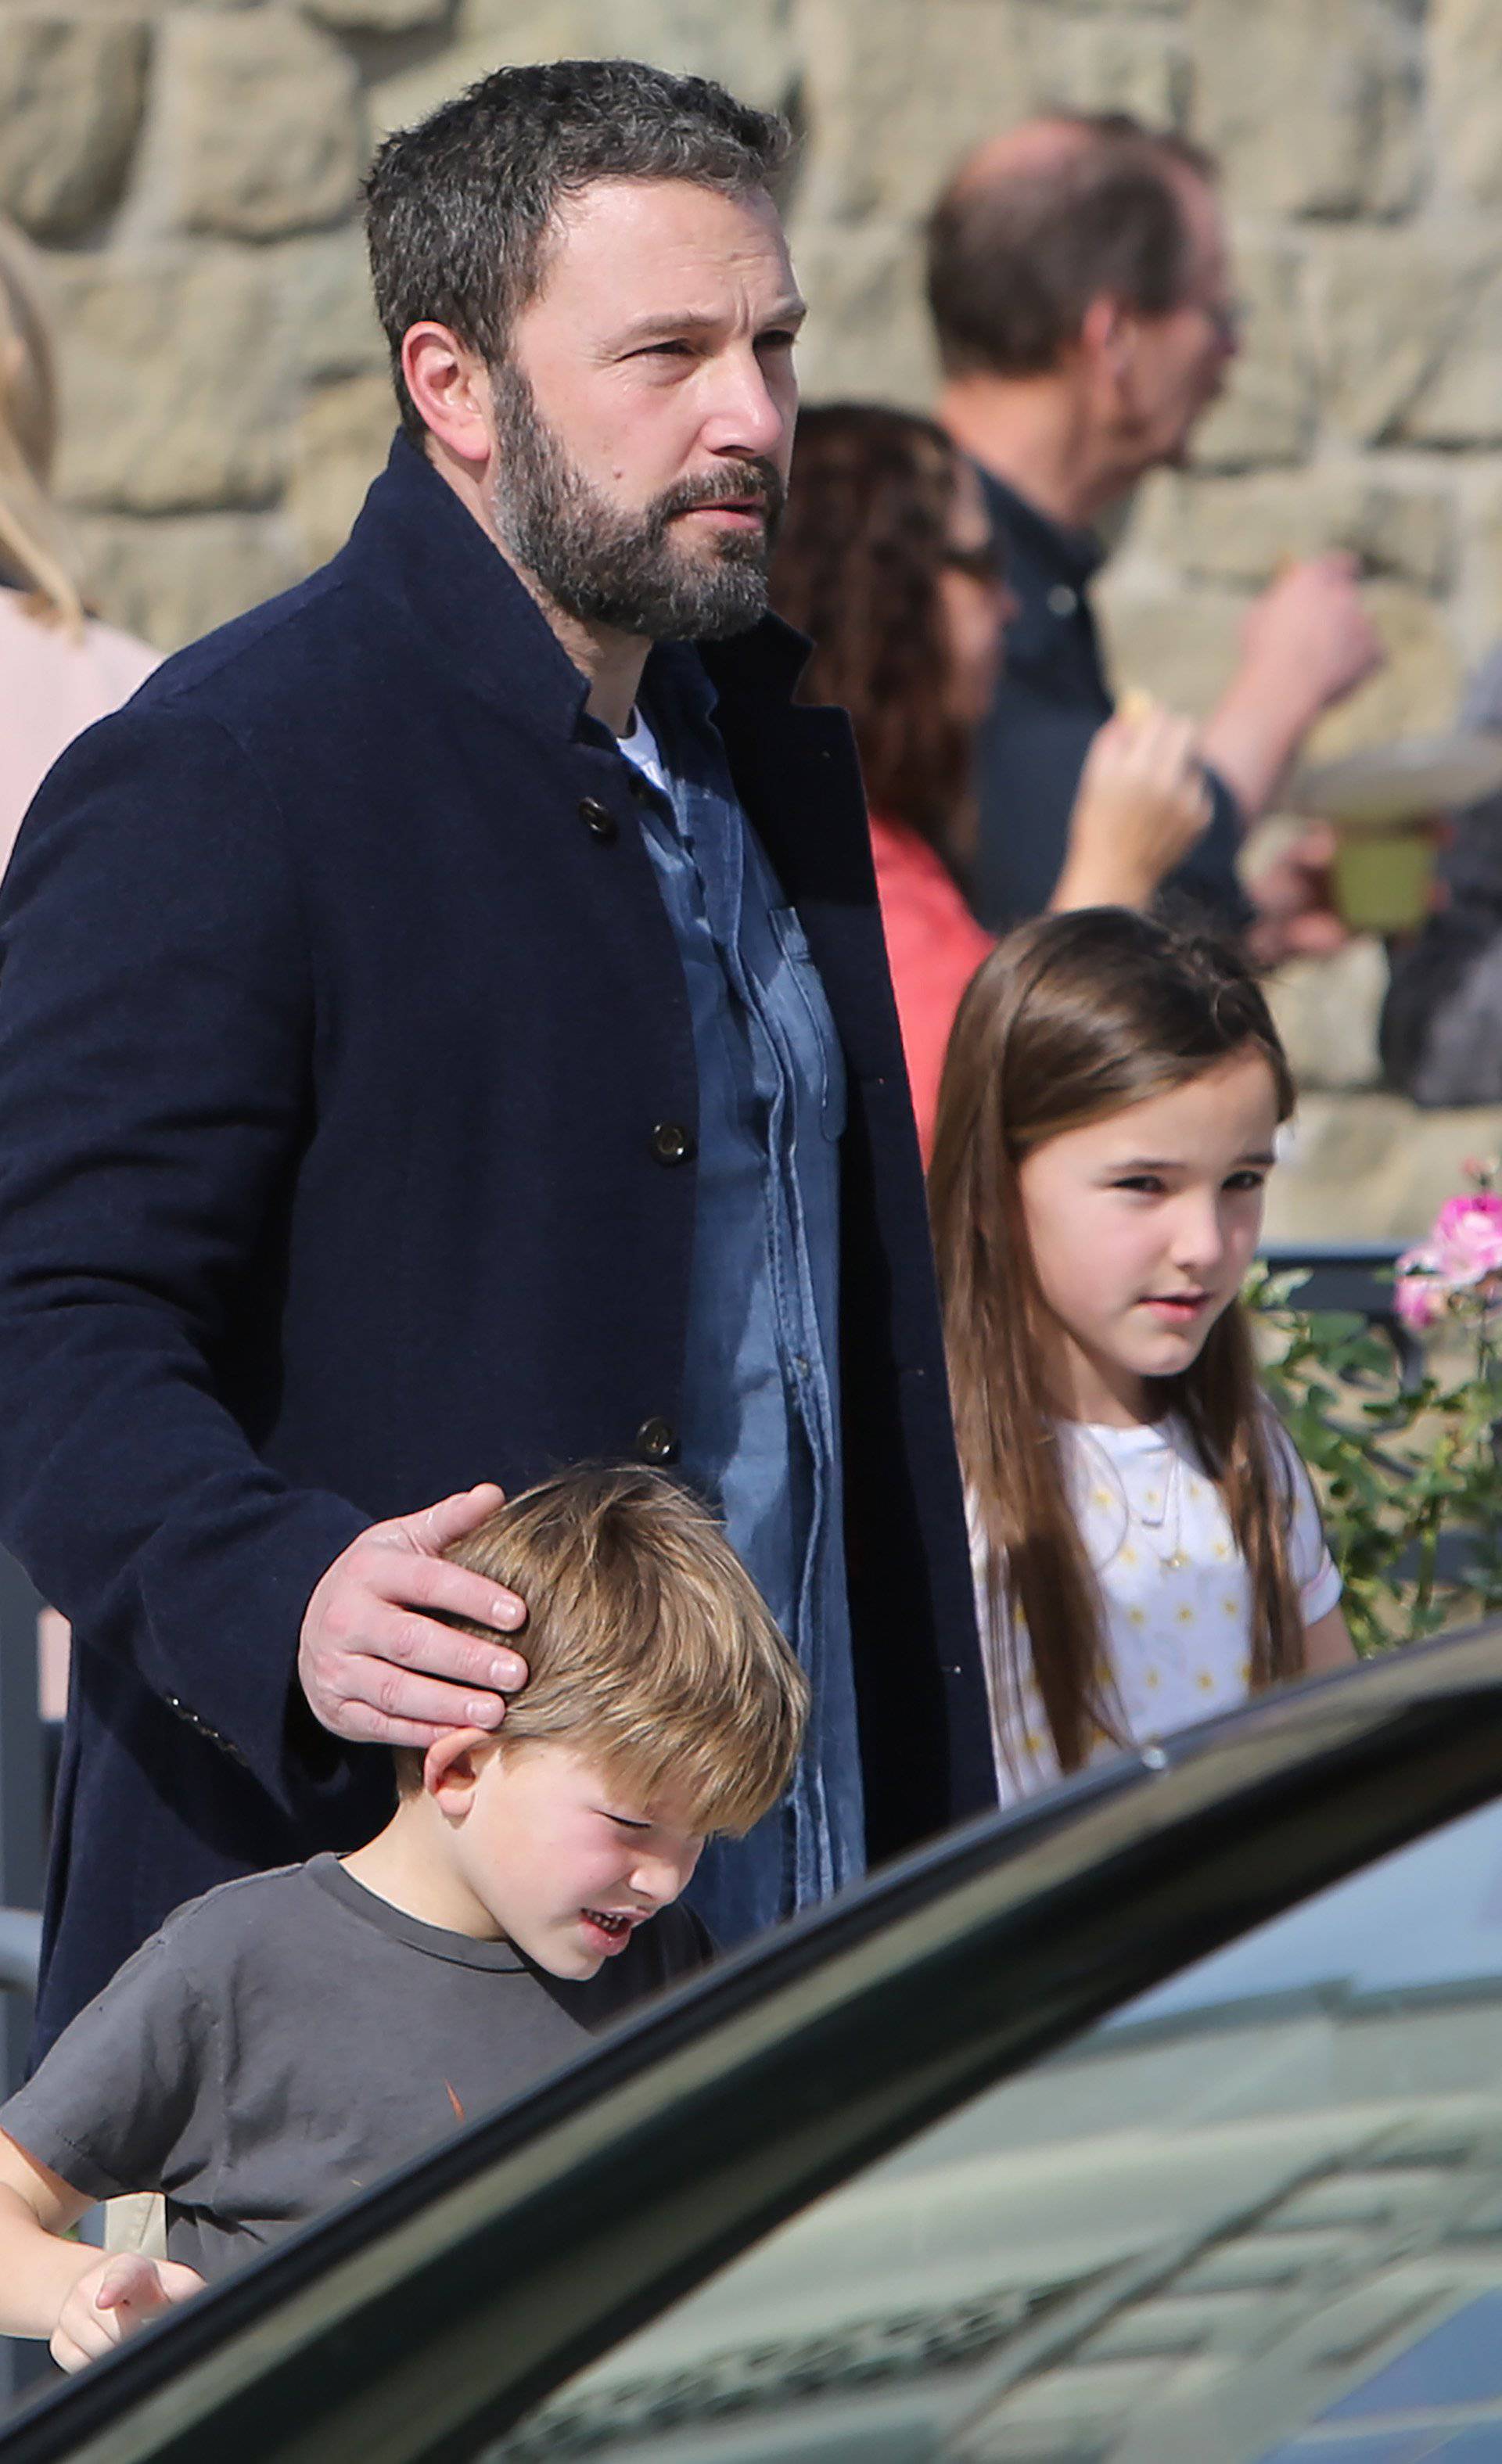 Ben Affleck and ex-wife Jennifer Garner at Church with their children in Los Angeles